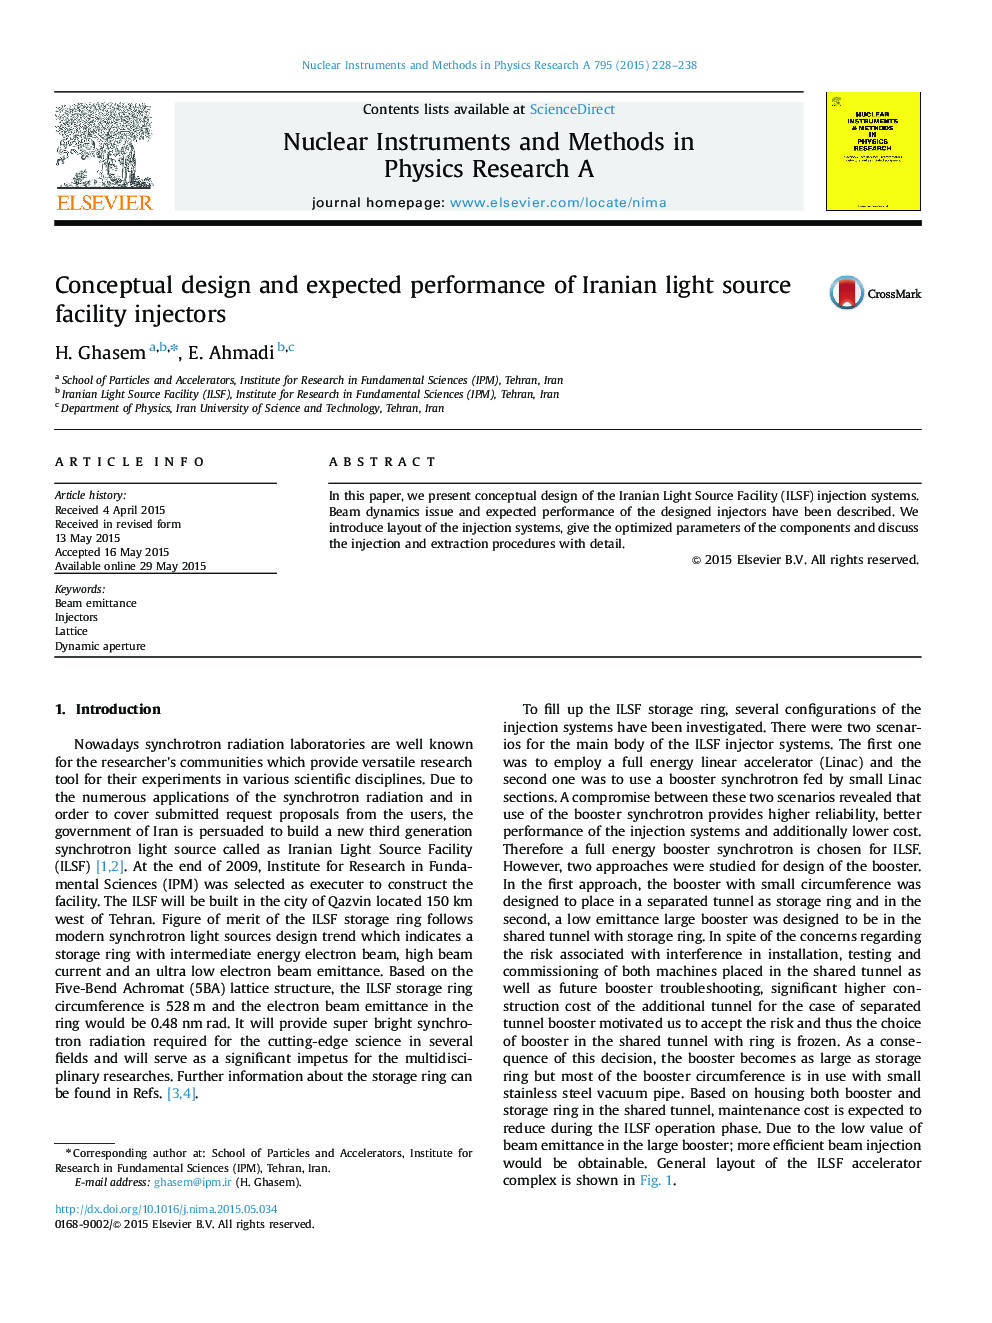 Conceptual design and expected performance of Iranian light source facility injectors